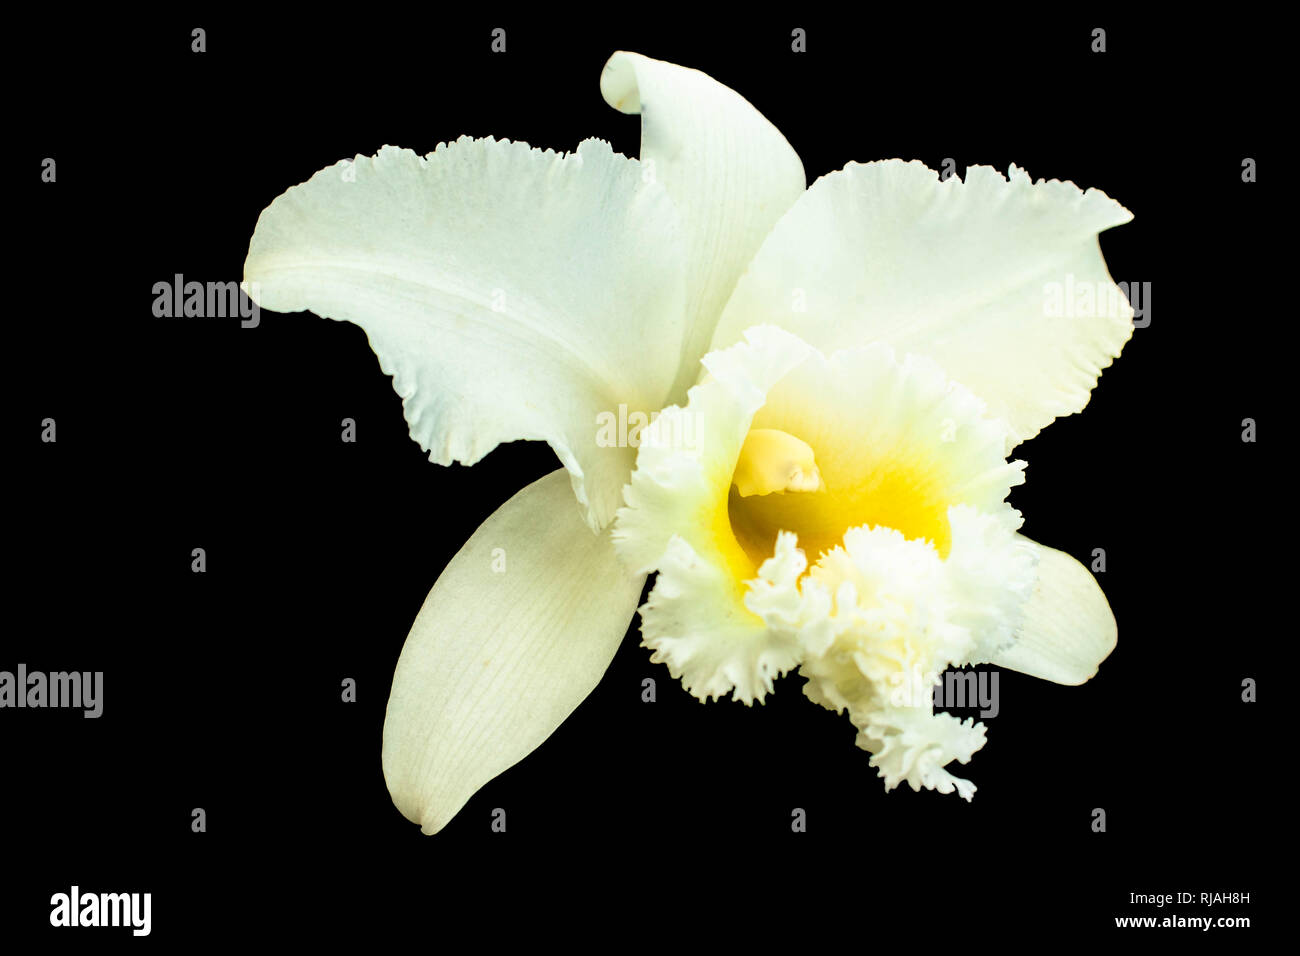 White Cattleya orchid Cattleya are orchid with white petals are layer yellow pollen Cattleya have clipping path on black background. Stock Photo